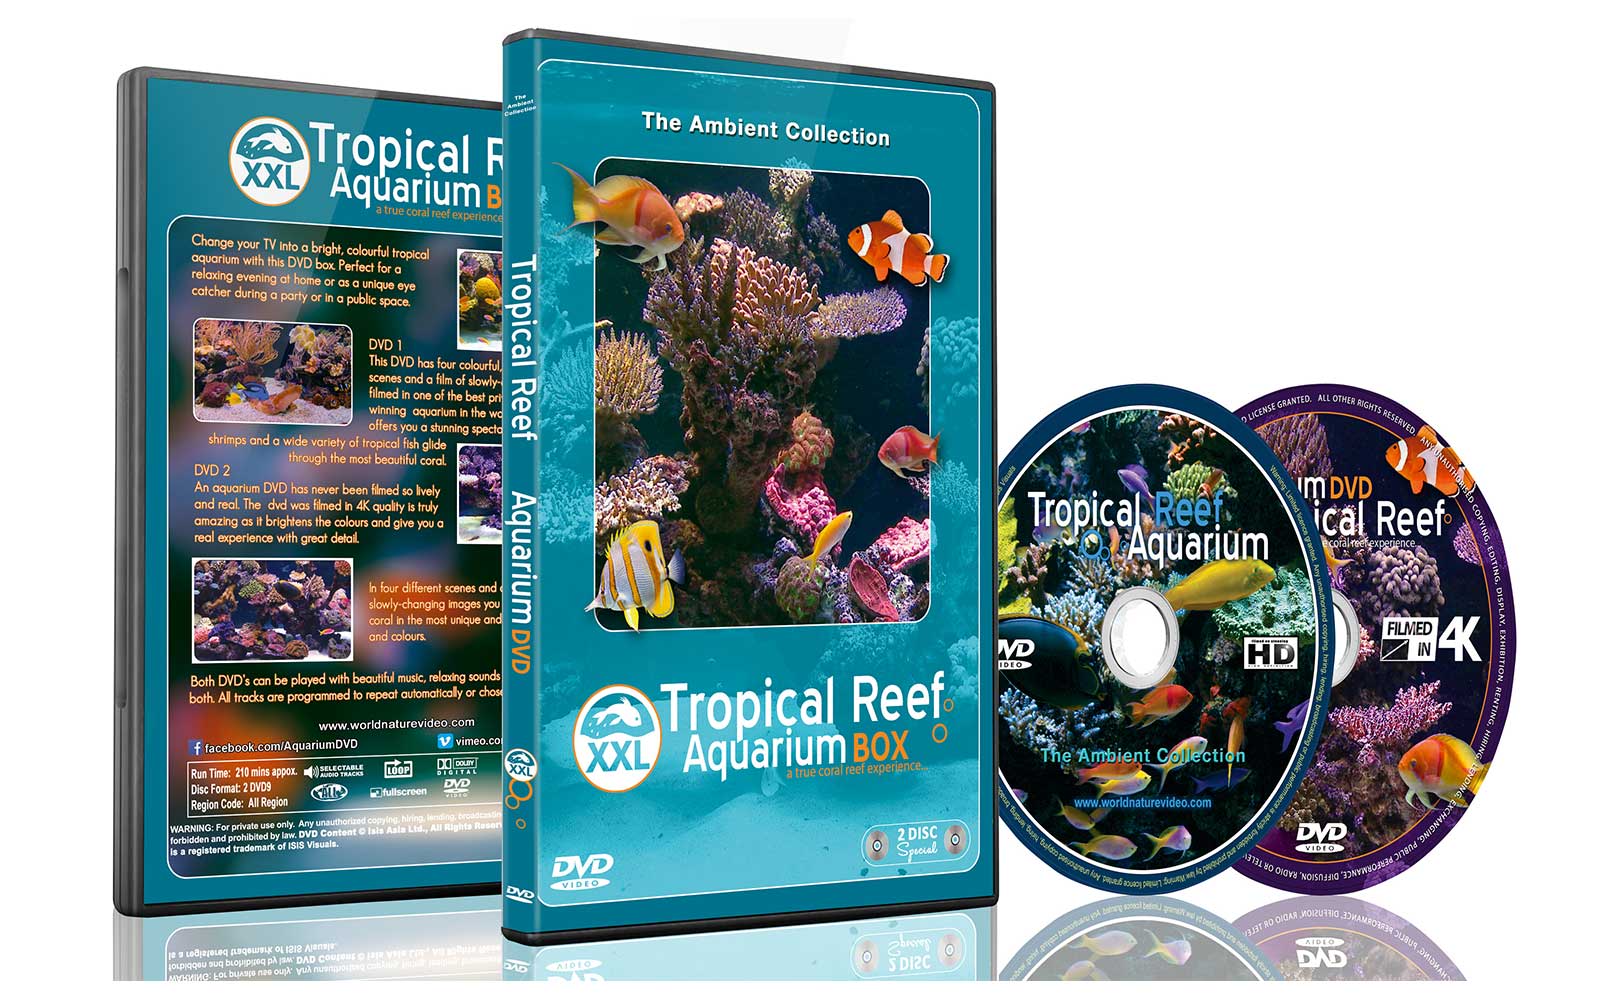 Tropical Reef Aquarium XXL Box – The Ambient Collections Dvds